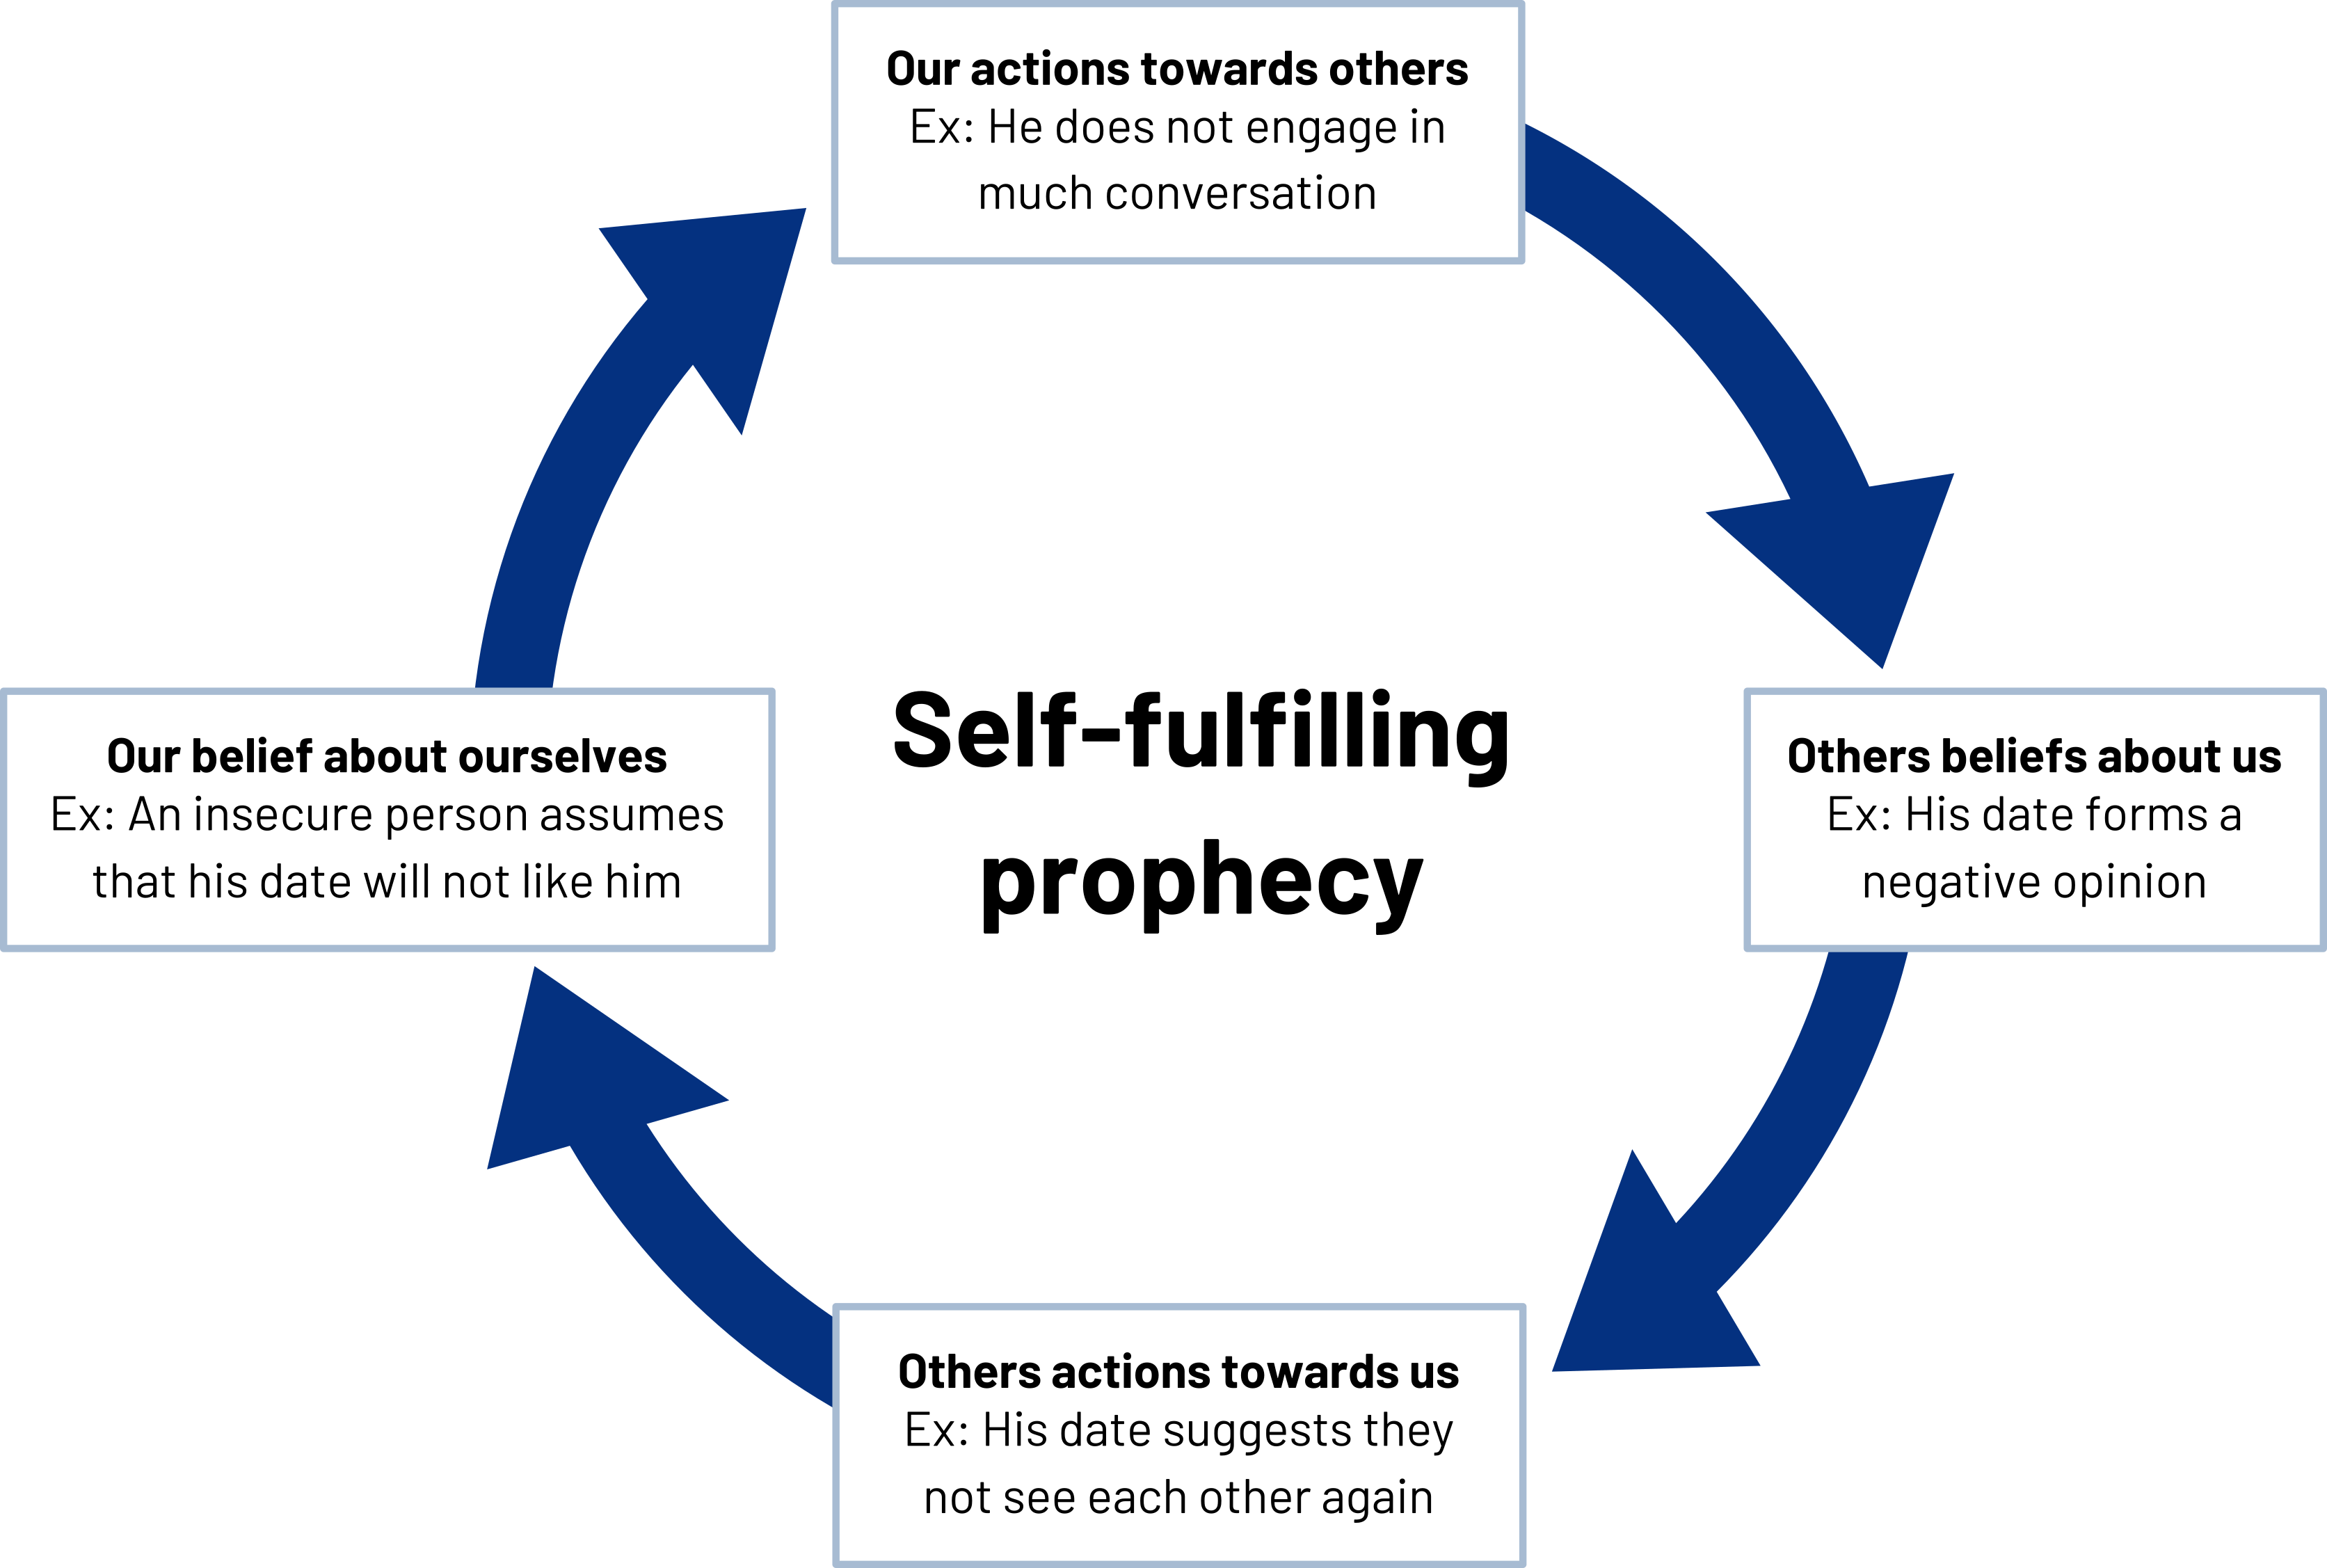 Circle with clockwise arrows. Title in middle: Self-fulfilling prophecy. Top: Our actions towards others. Ex: He does not engage in much conversation. Right: Others beliefs about us. Ex: His date forms a negative opinion. Bottom: Others actions towards us. Ex: His date suggests they not see each other again. Left: Our belief about ourselves. Ex: An insecure person assumes that his date will not like him.